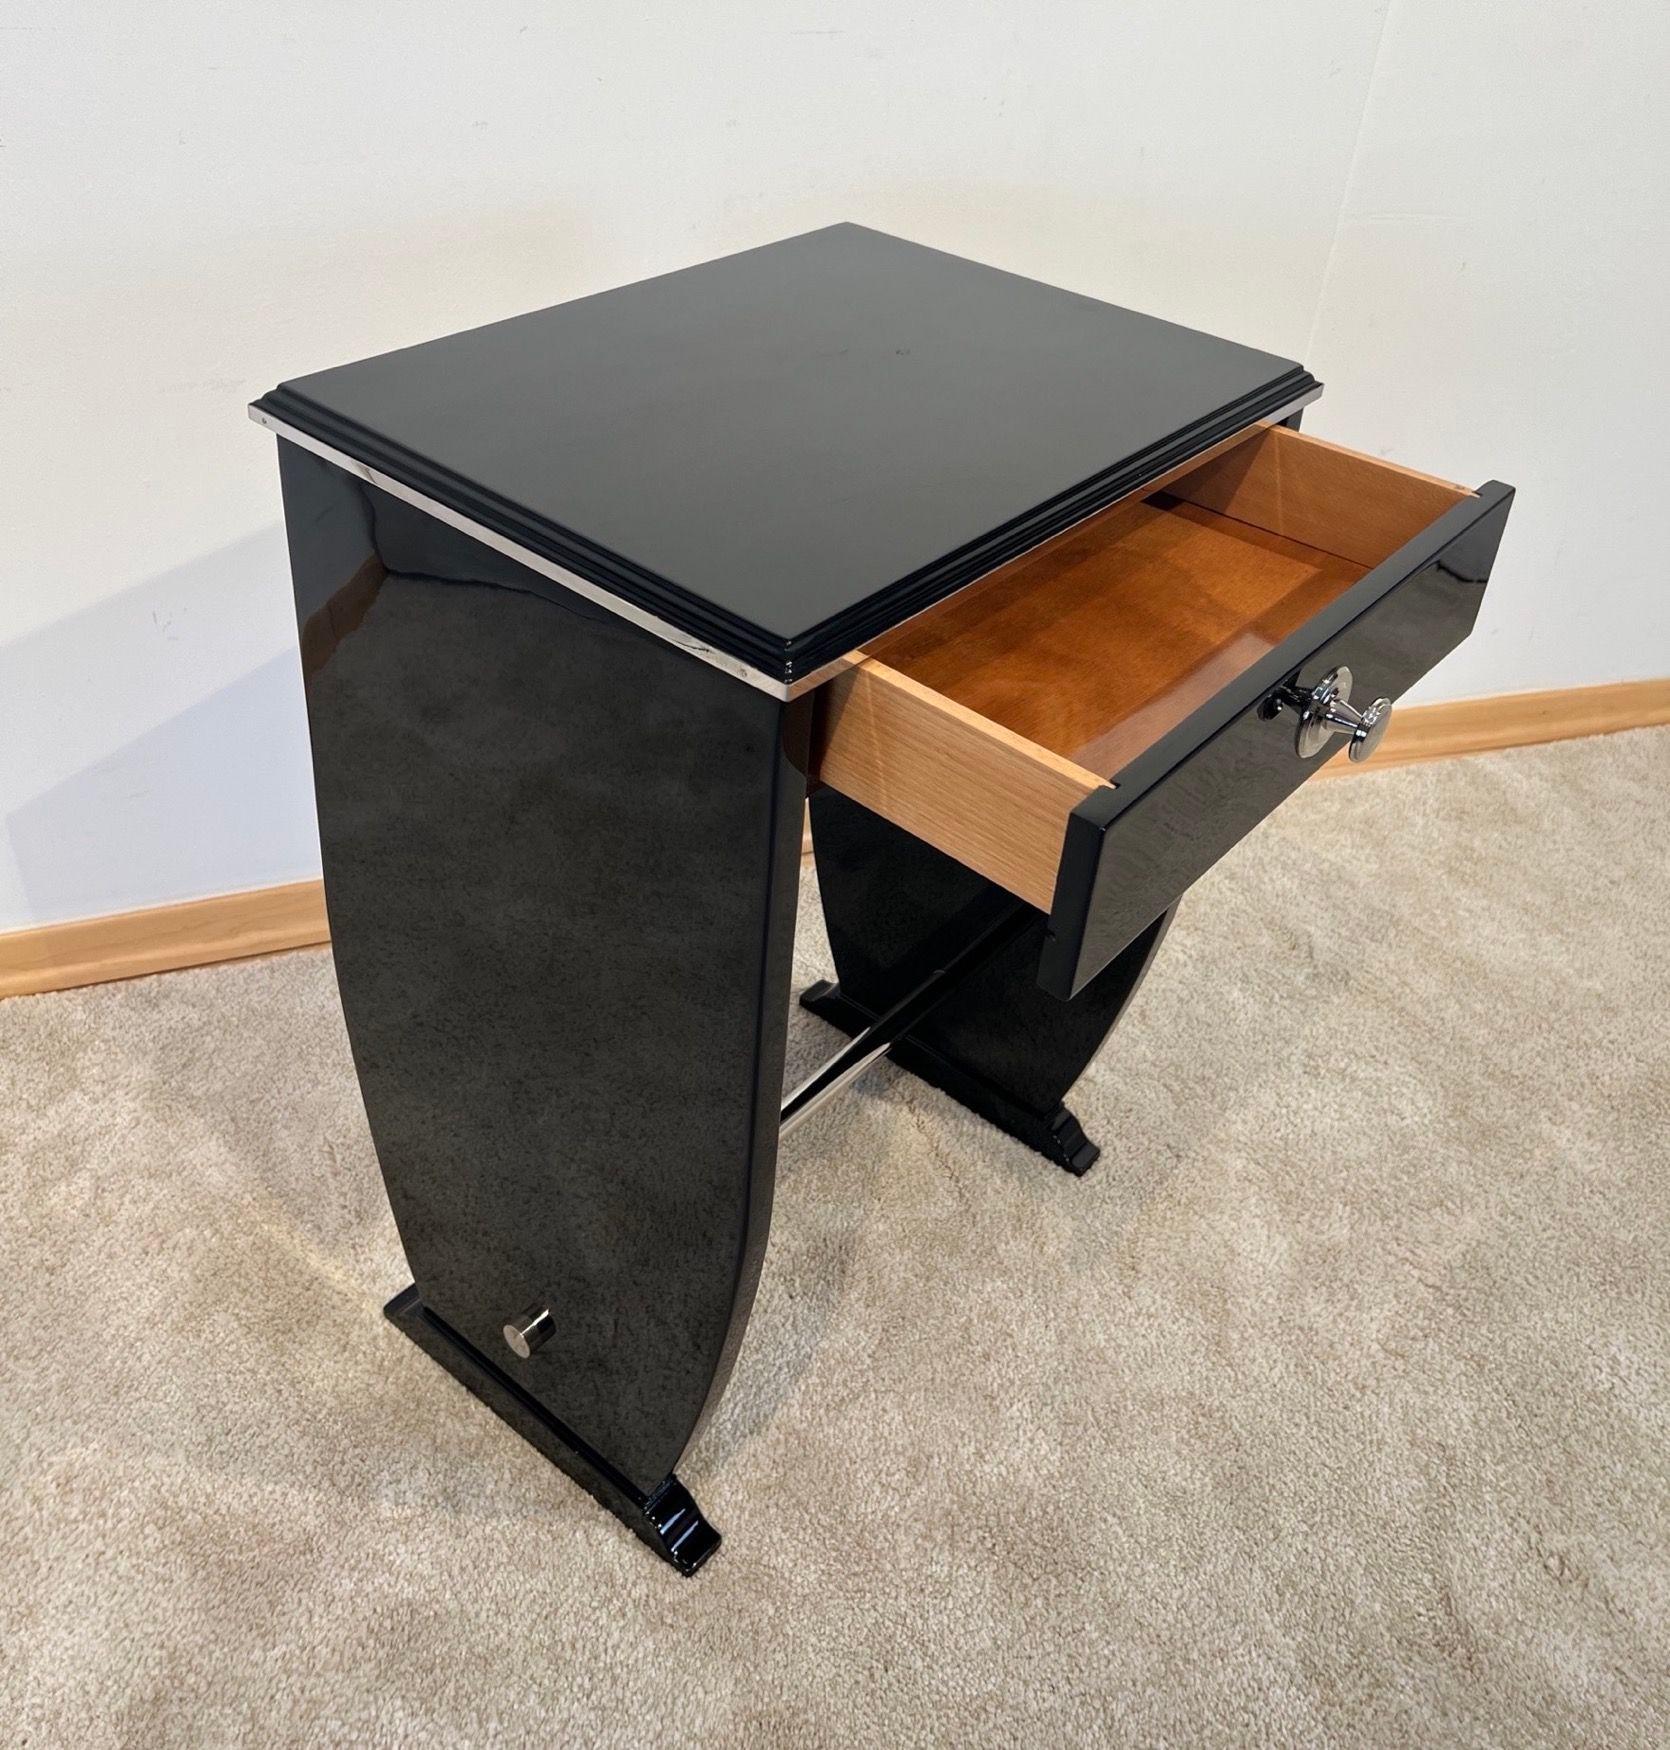 Art Deco Side Table with Drawer, Black Lacquer and Chrome, France circa 1930 For Sale 10